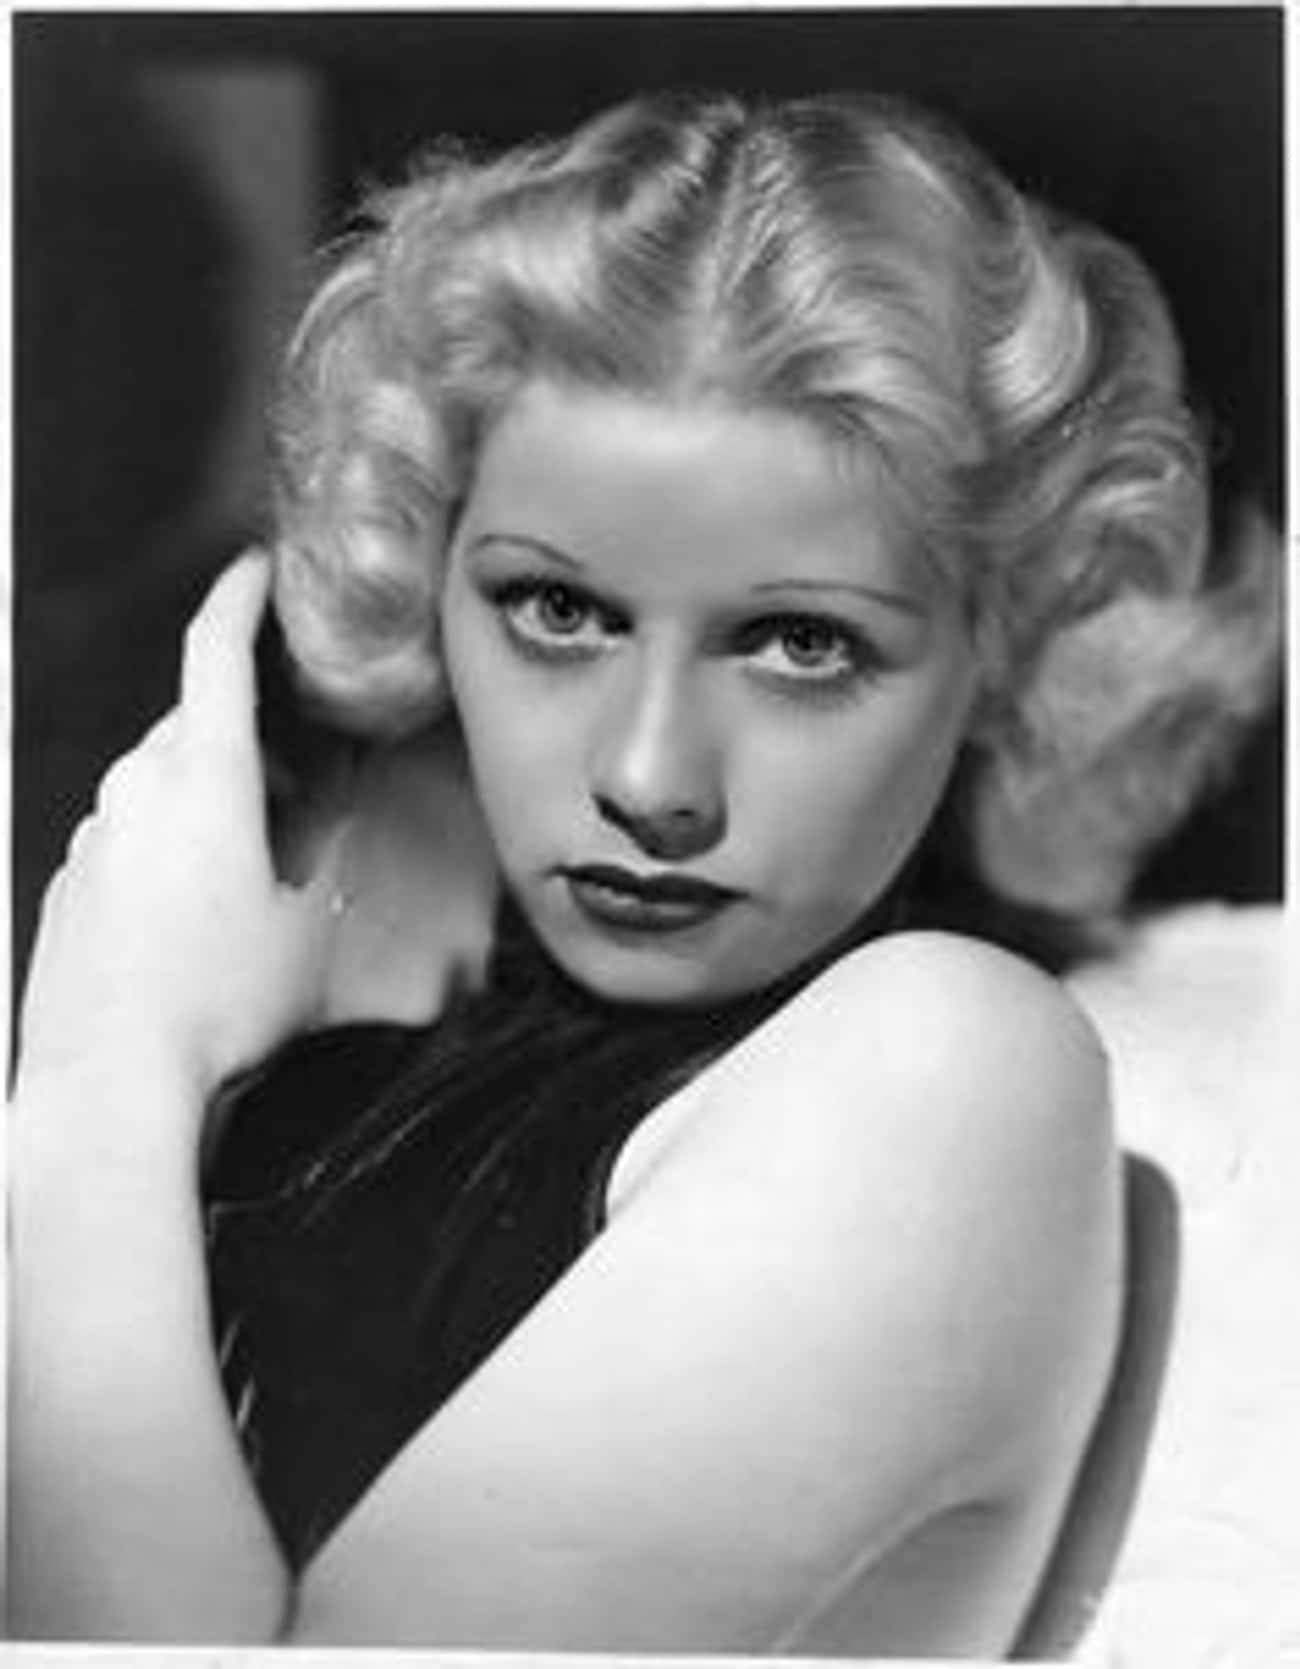 Young Lucille Ball in Black Sleeveless Dress